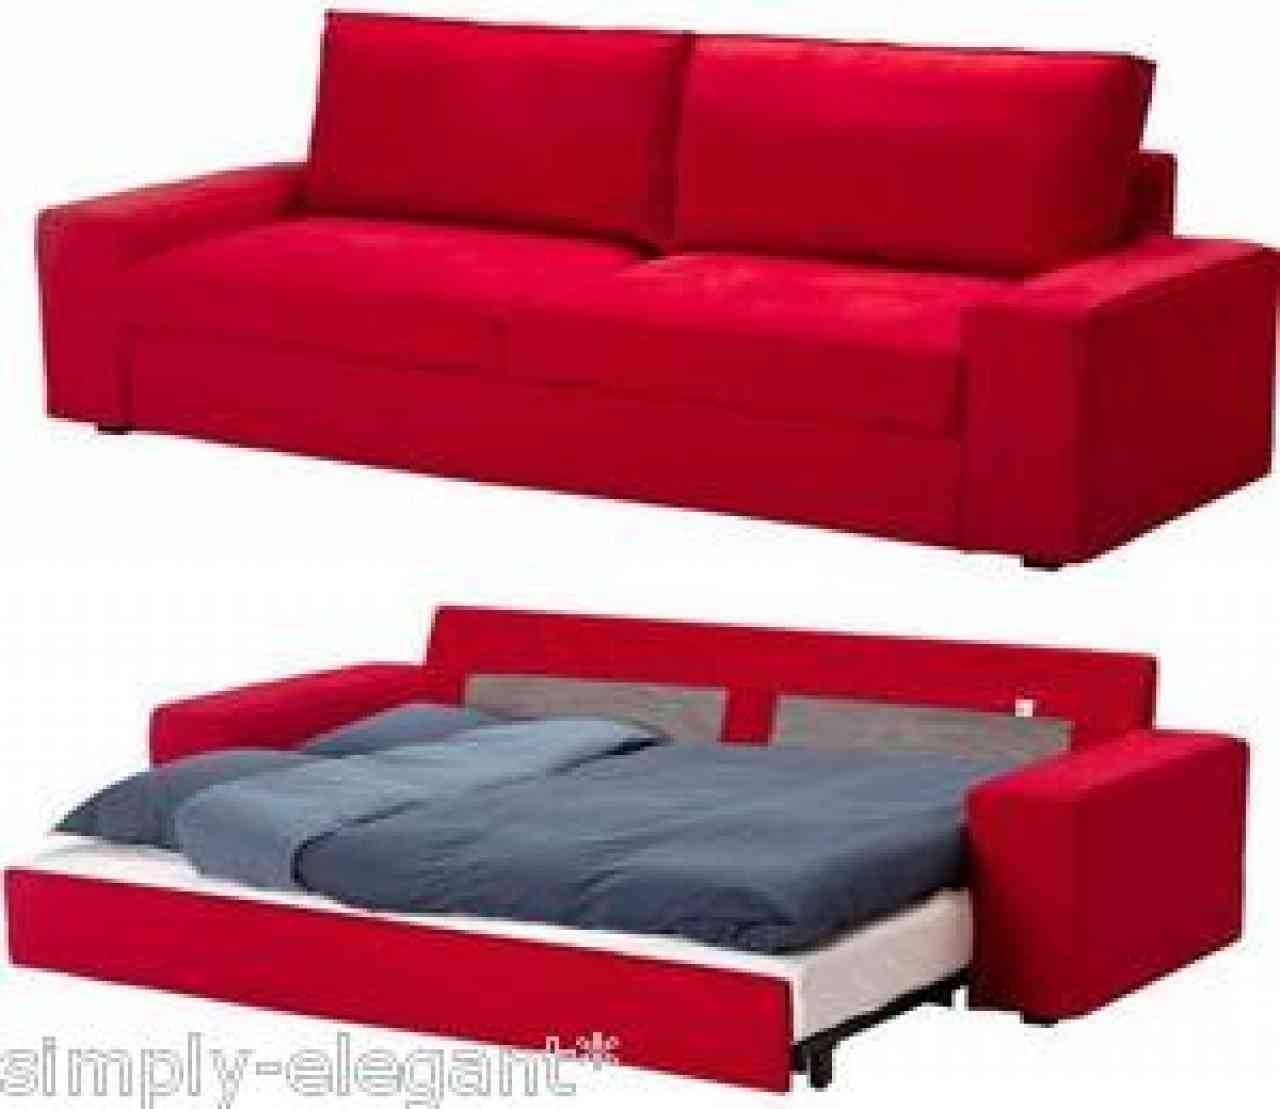 Convertible Sofa Bed Ikea 83 With Convertible Sofa Bed Ikea For Queen Size Convertible Sofa Beds (View 5 of 15)